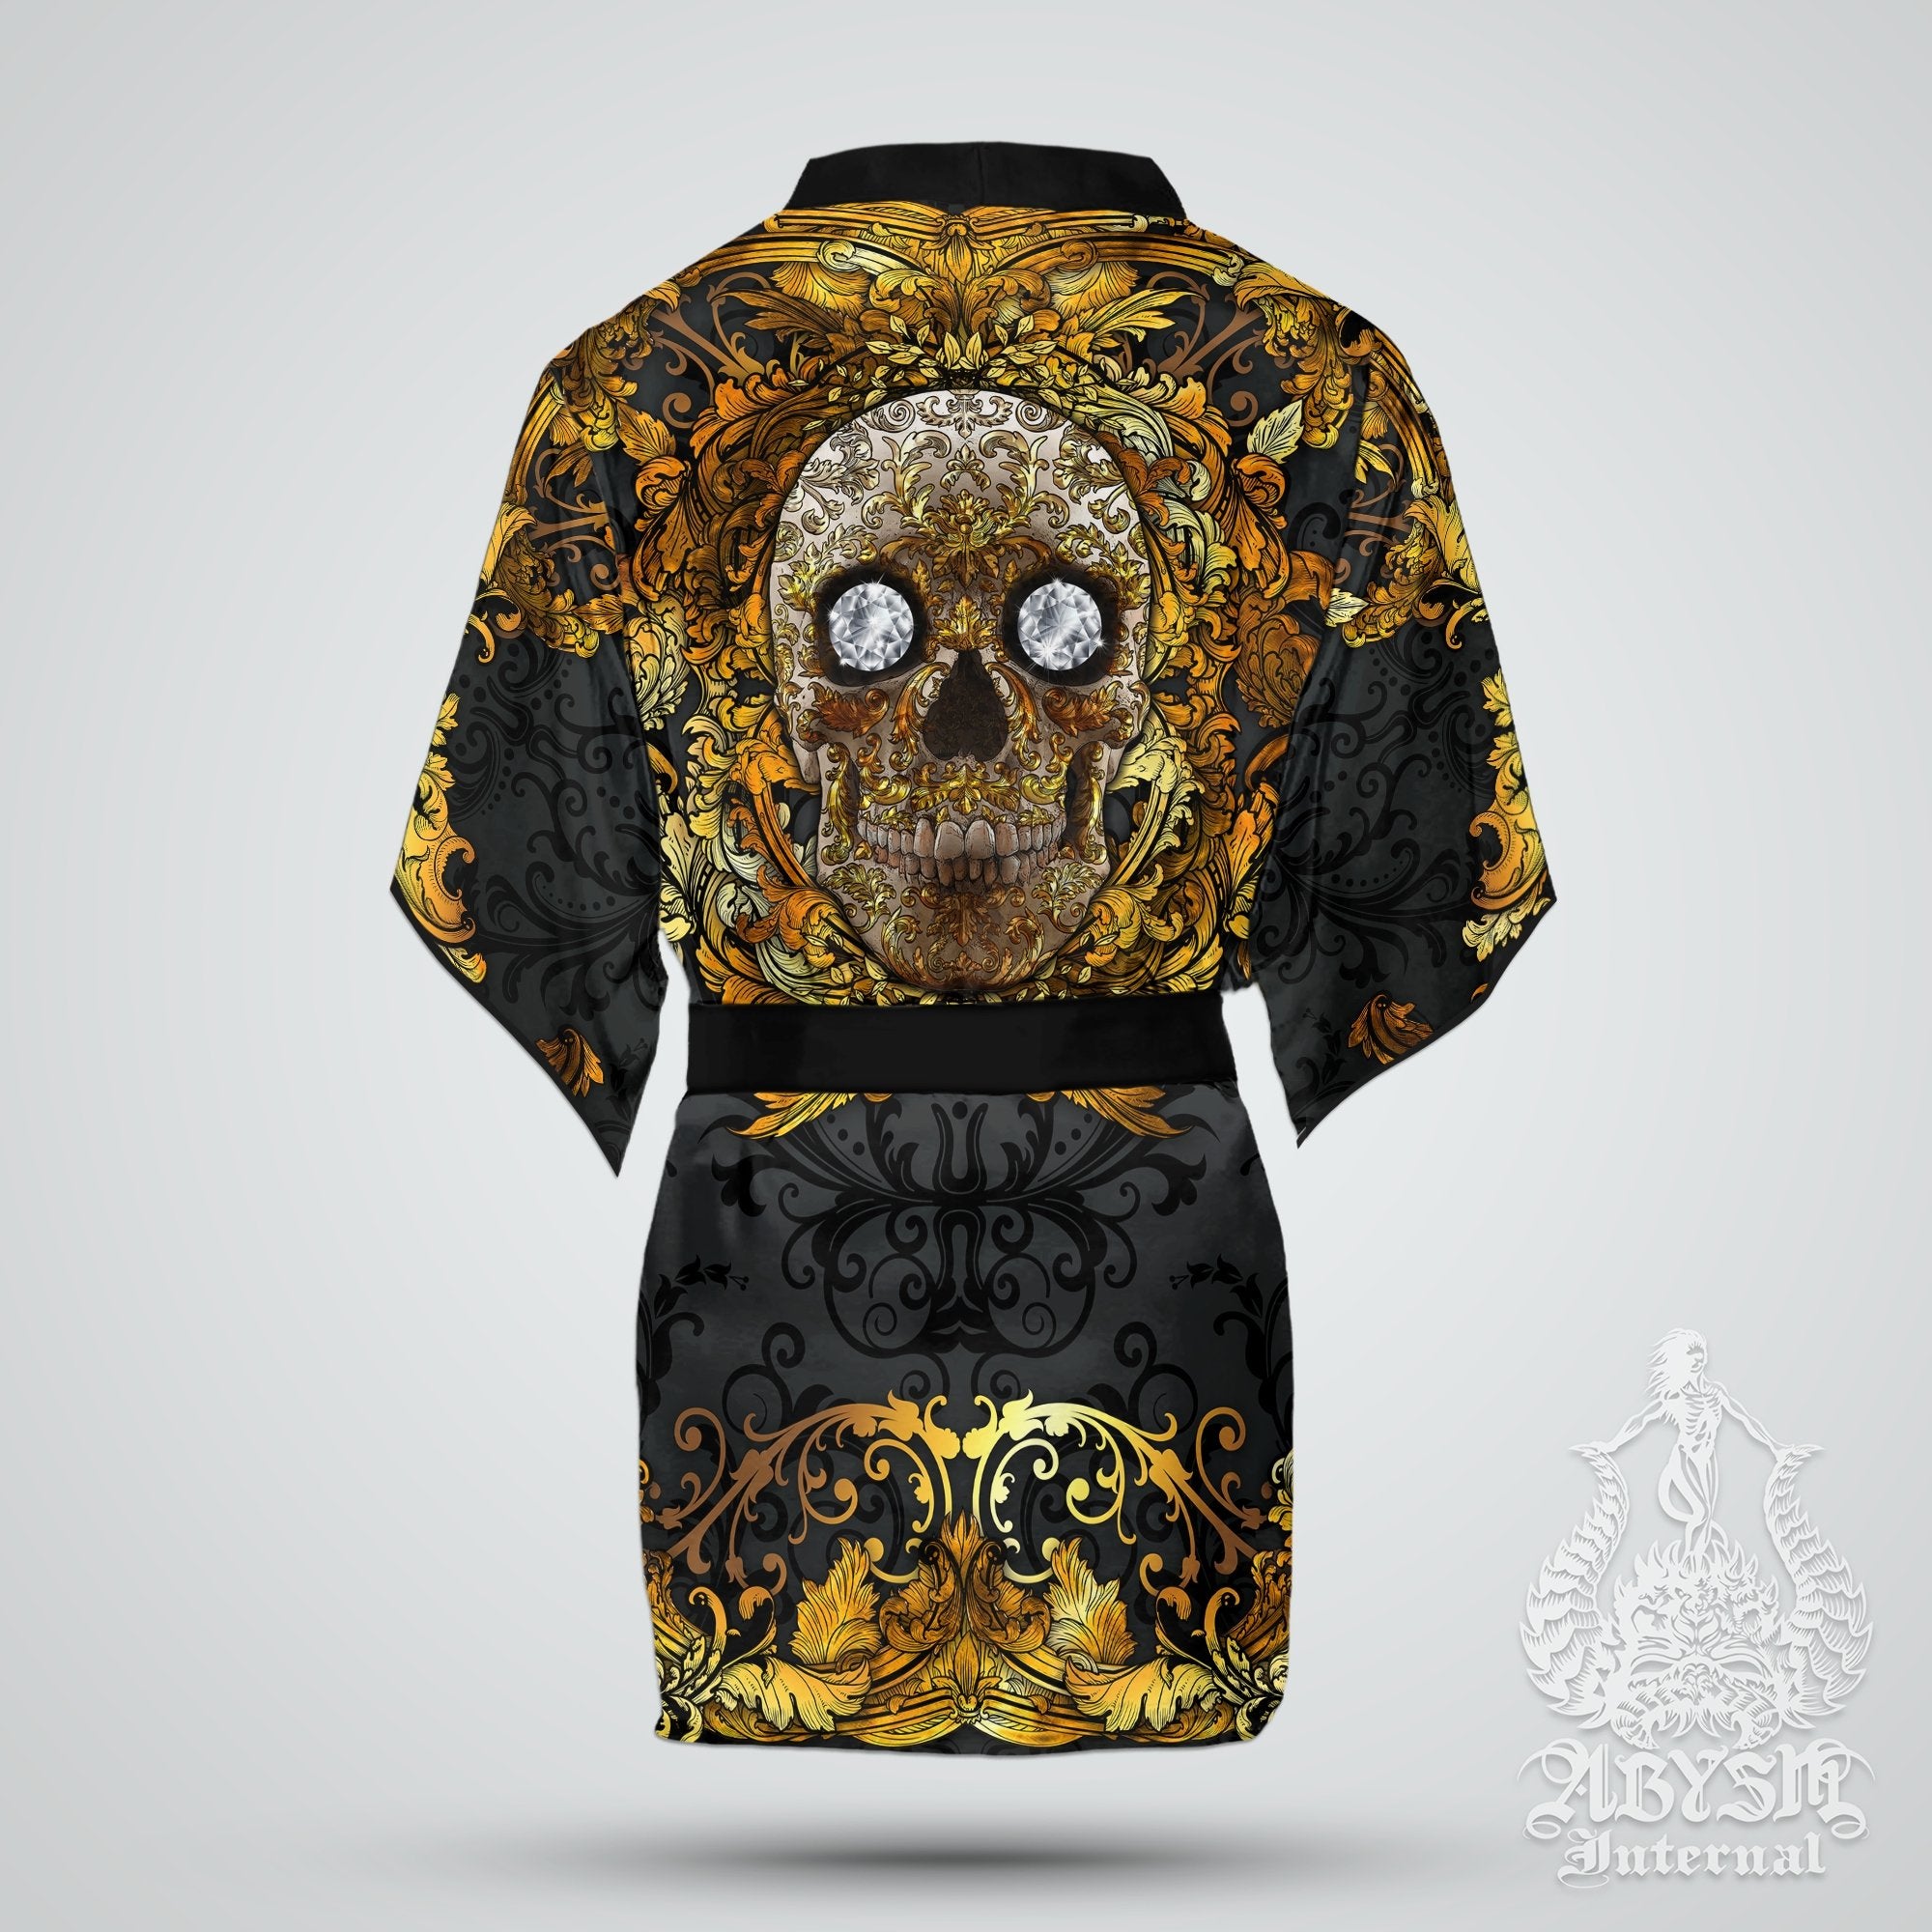 Skull Cover Up, Beach Outfit, Party Kimono, Summer Festival Robe, Goth Indie and Alternative Clothing, Unisex - Gold Black - Abysm Internal